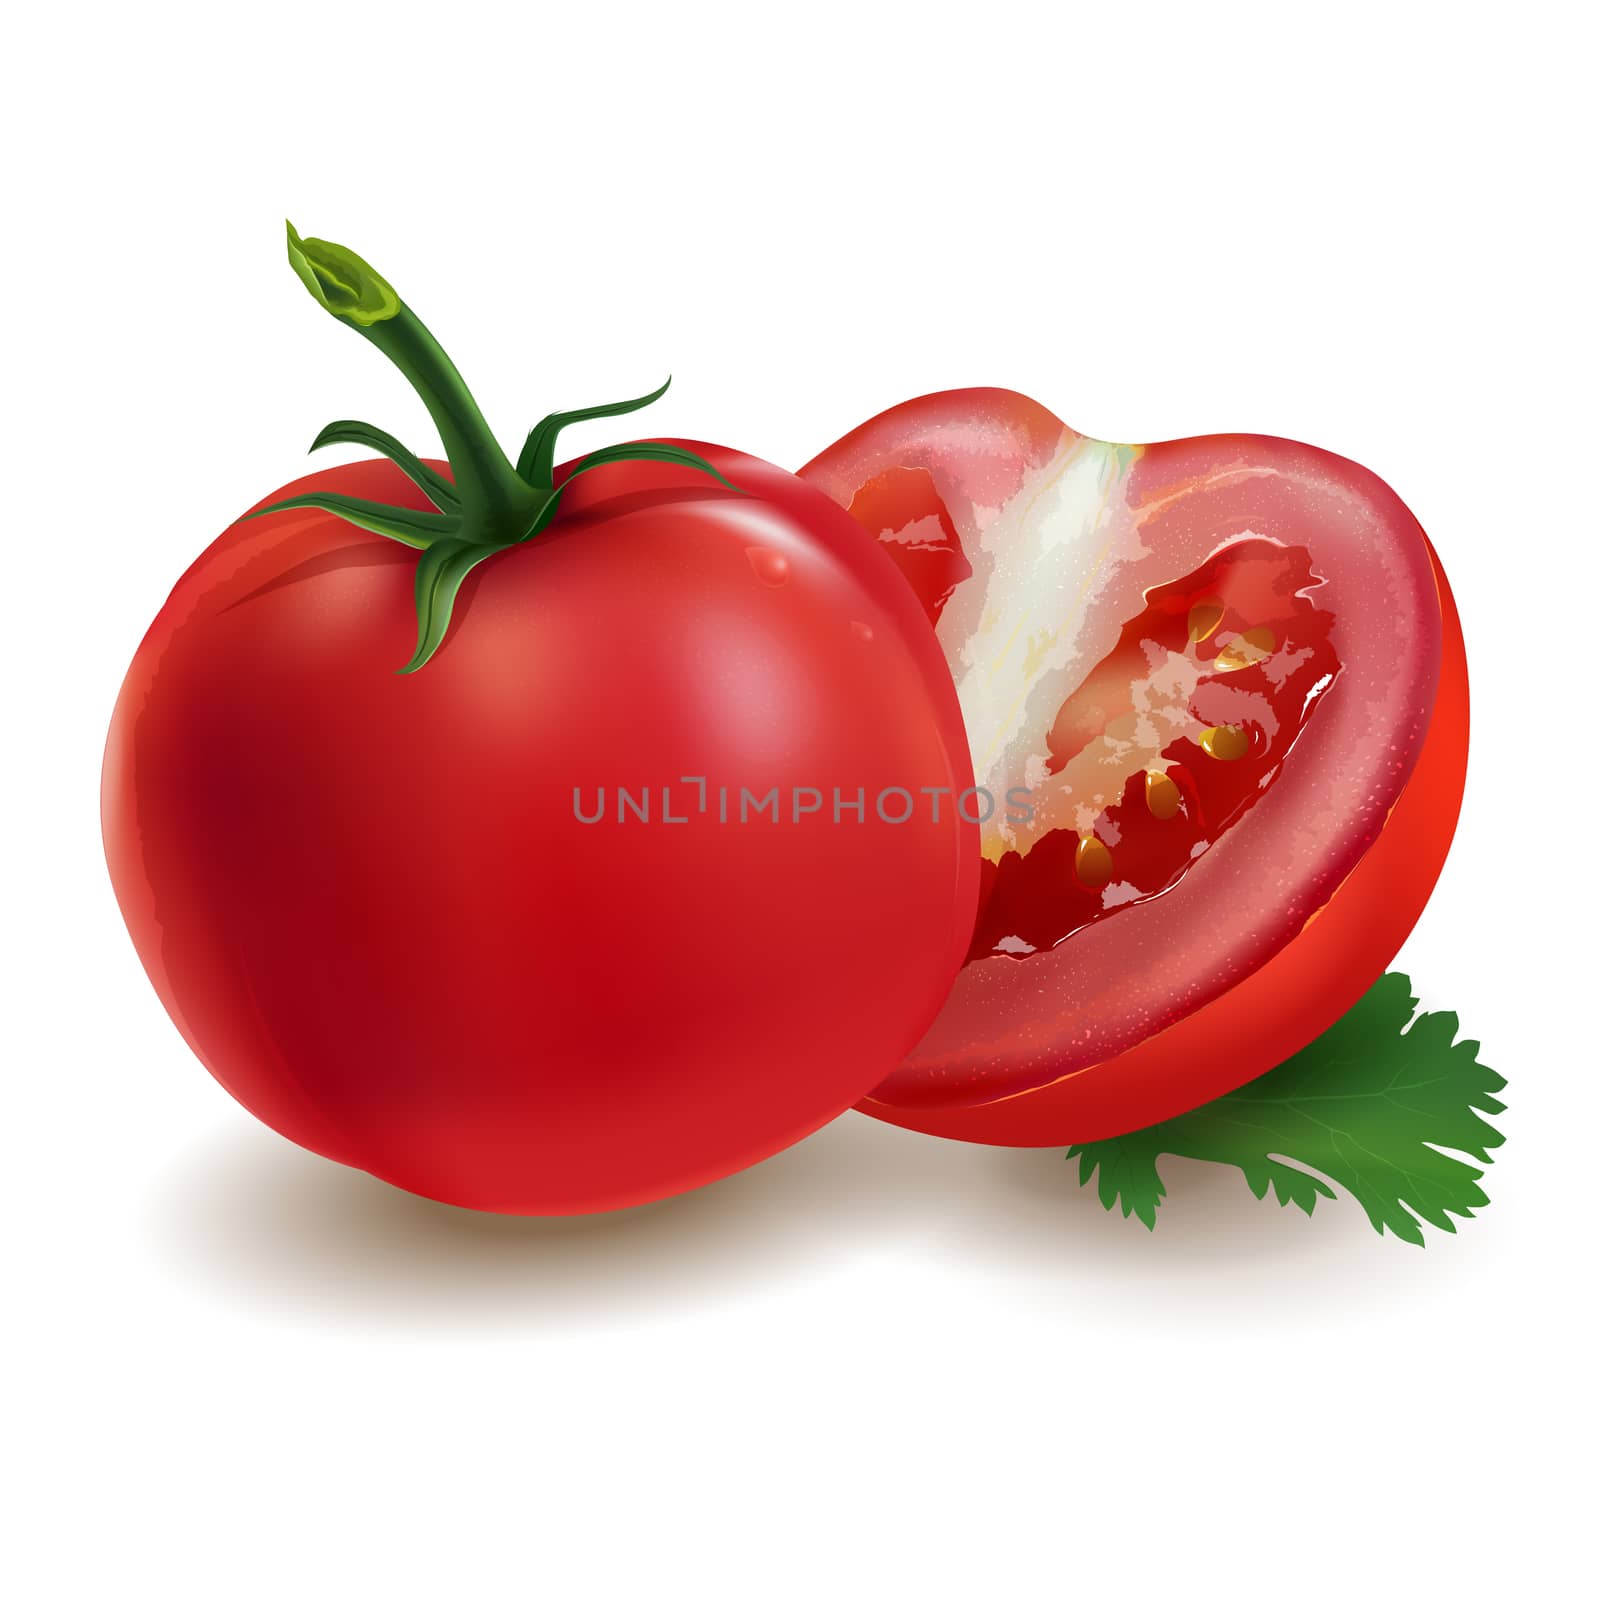 Realistic fresh tomatoes on a white background.